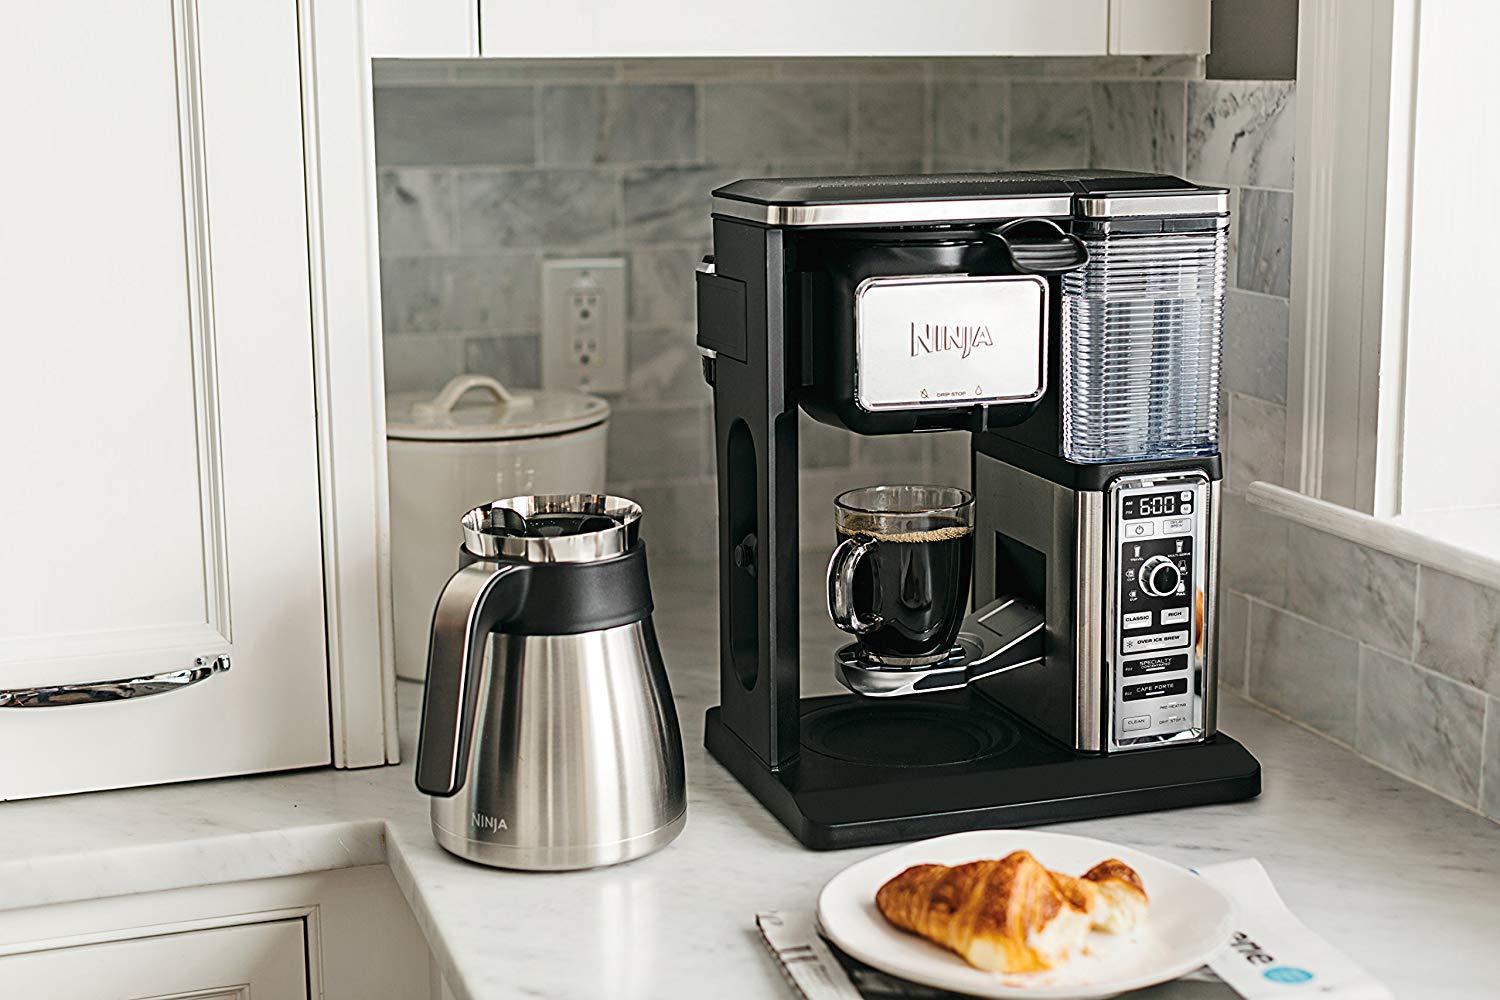 Ninja CF097 Coffee Bar Auto-iQ Programmable Coffee Maker with 6 Brew Sizes, 5 Brew Options, Milk Frother, Removable Water Reservoir, Stainless Carafe